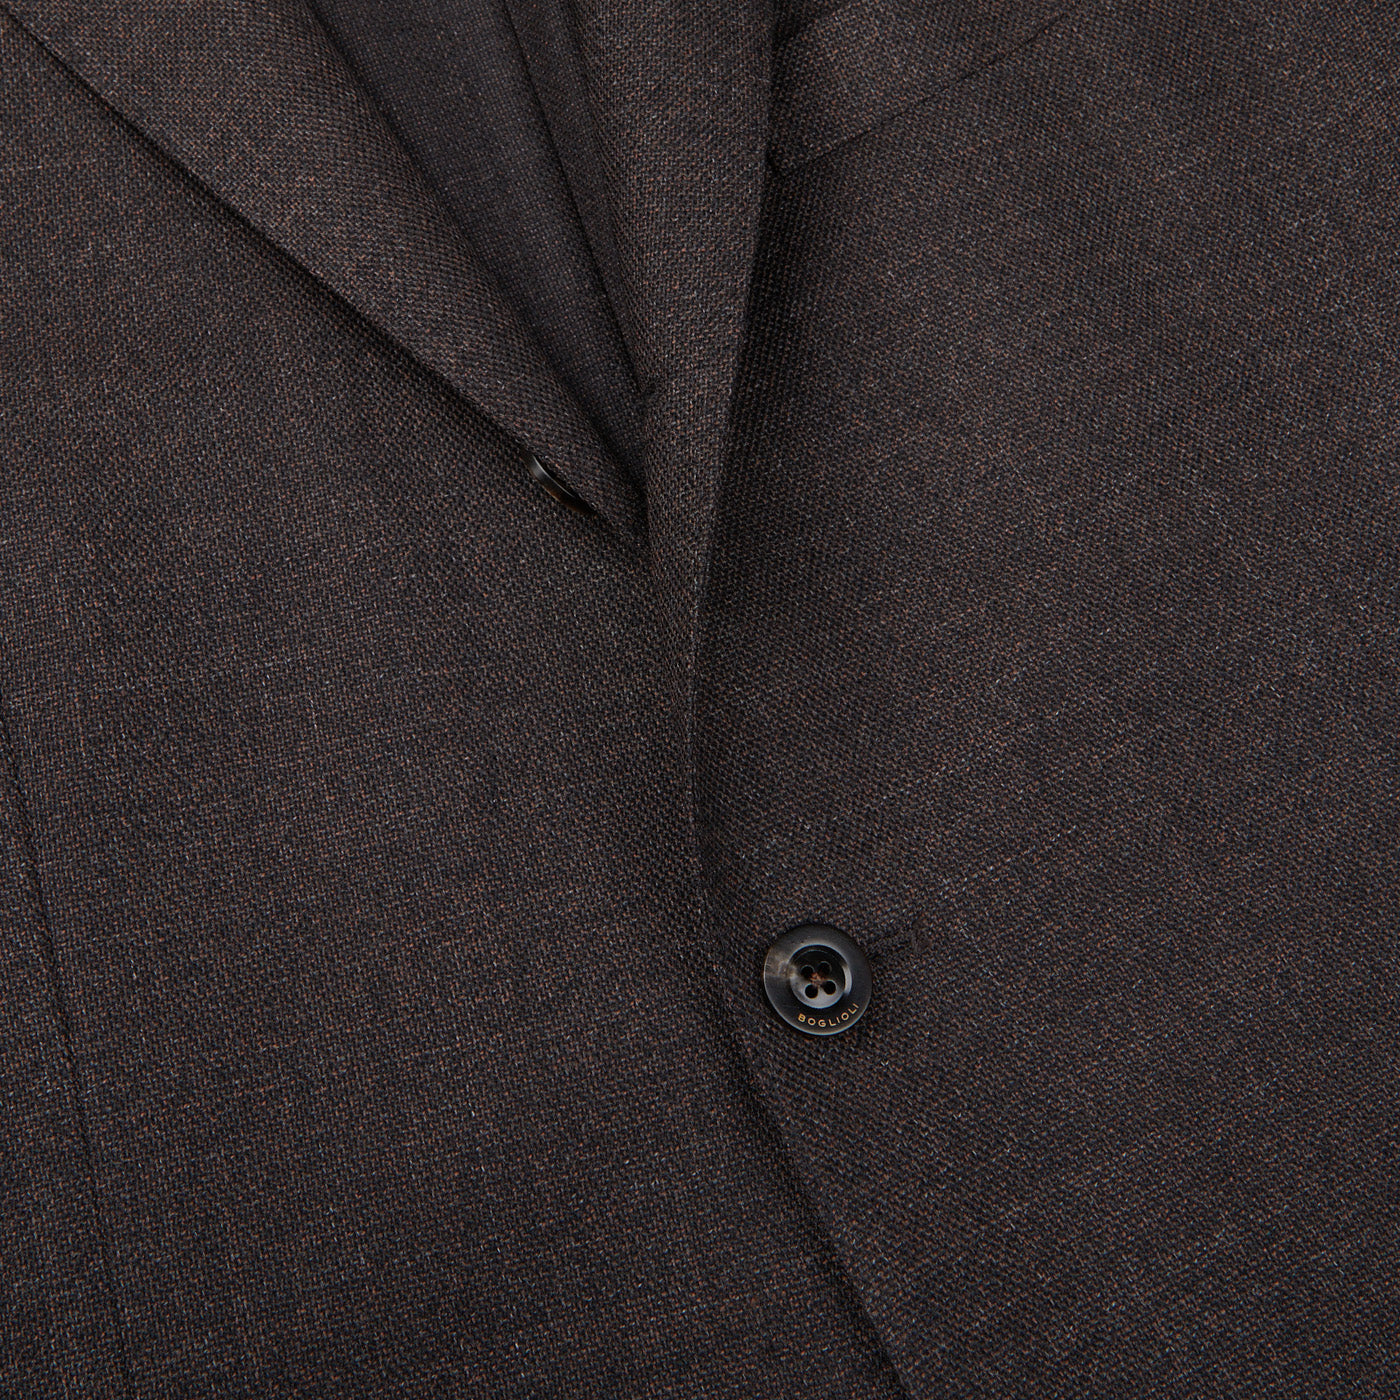 A close up image of a brown Boglioli Brown Melange Wool Hopsack K suit made from wool fabric.